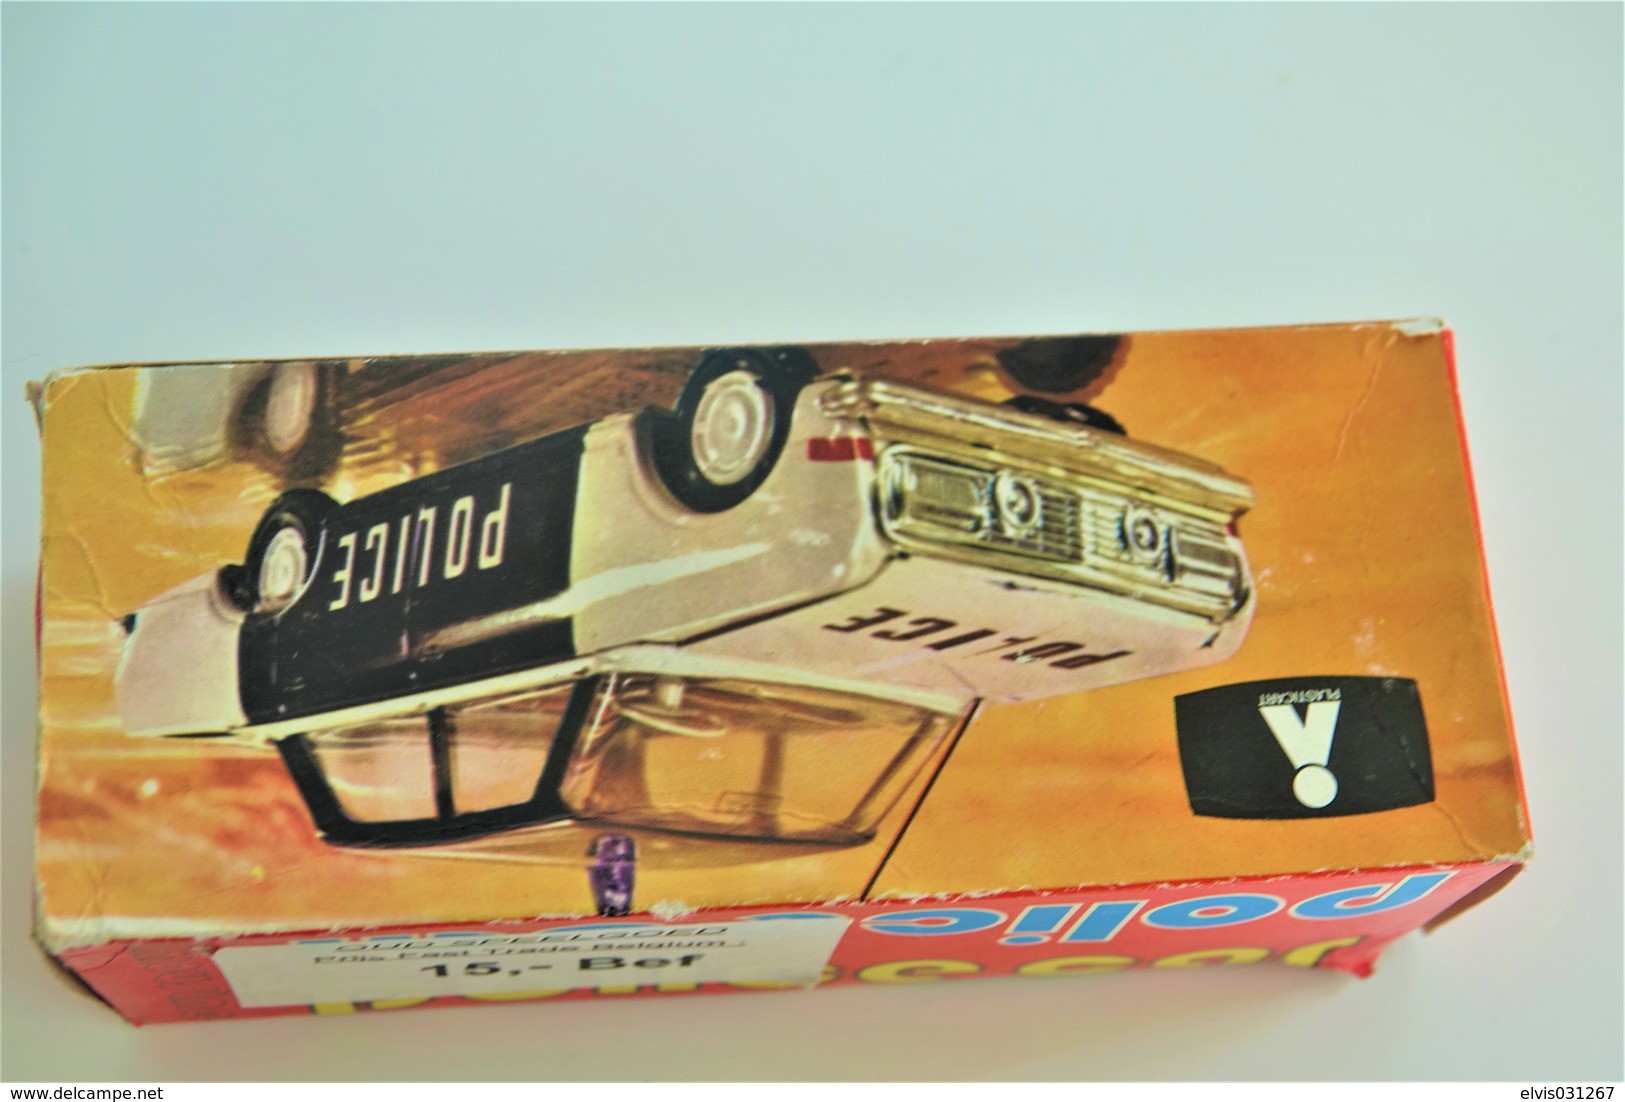 Vintage TIN TOY CAR : mark PLASTICART with BOX - Police Car - 15cm - DDR GDR GERMANY- 1960's - Friction Powered